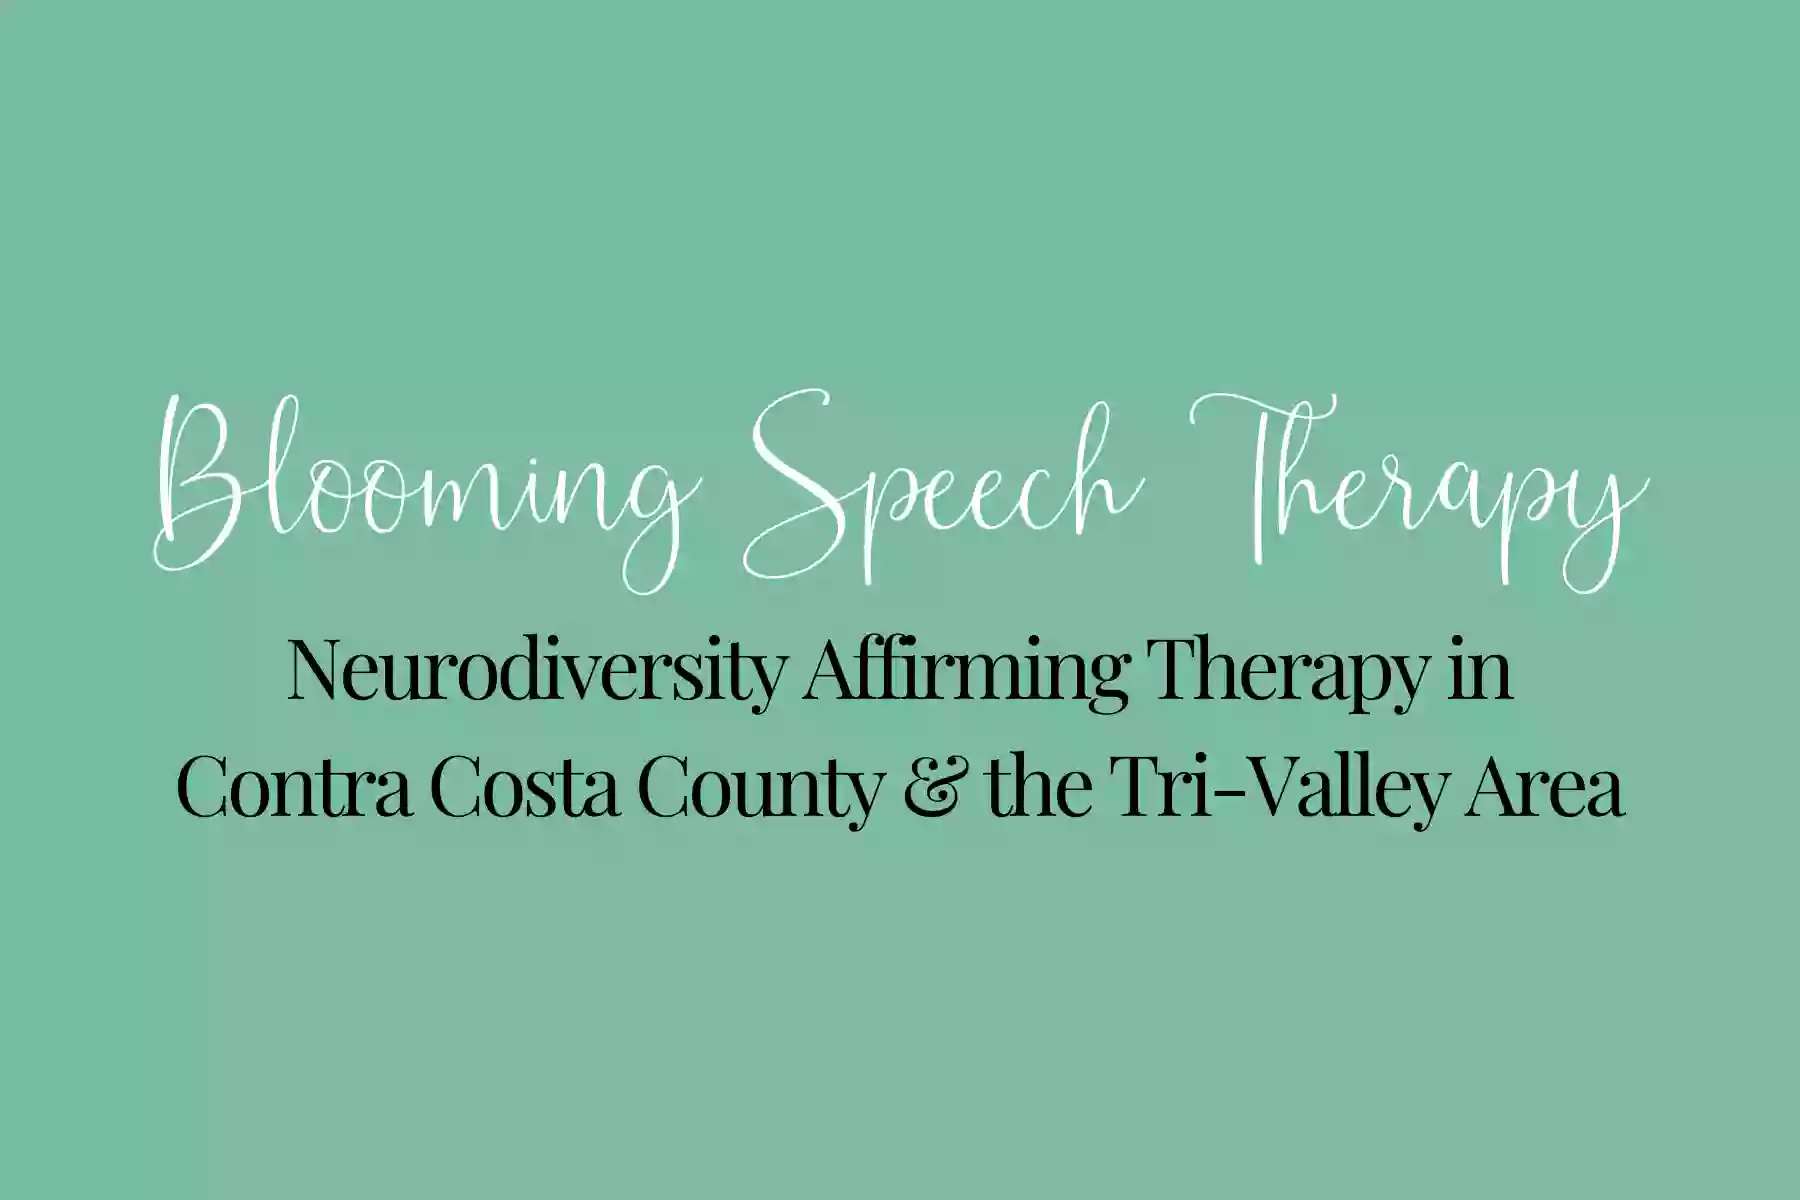 Blooming Speech Therapy